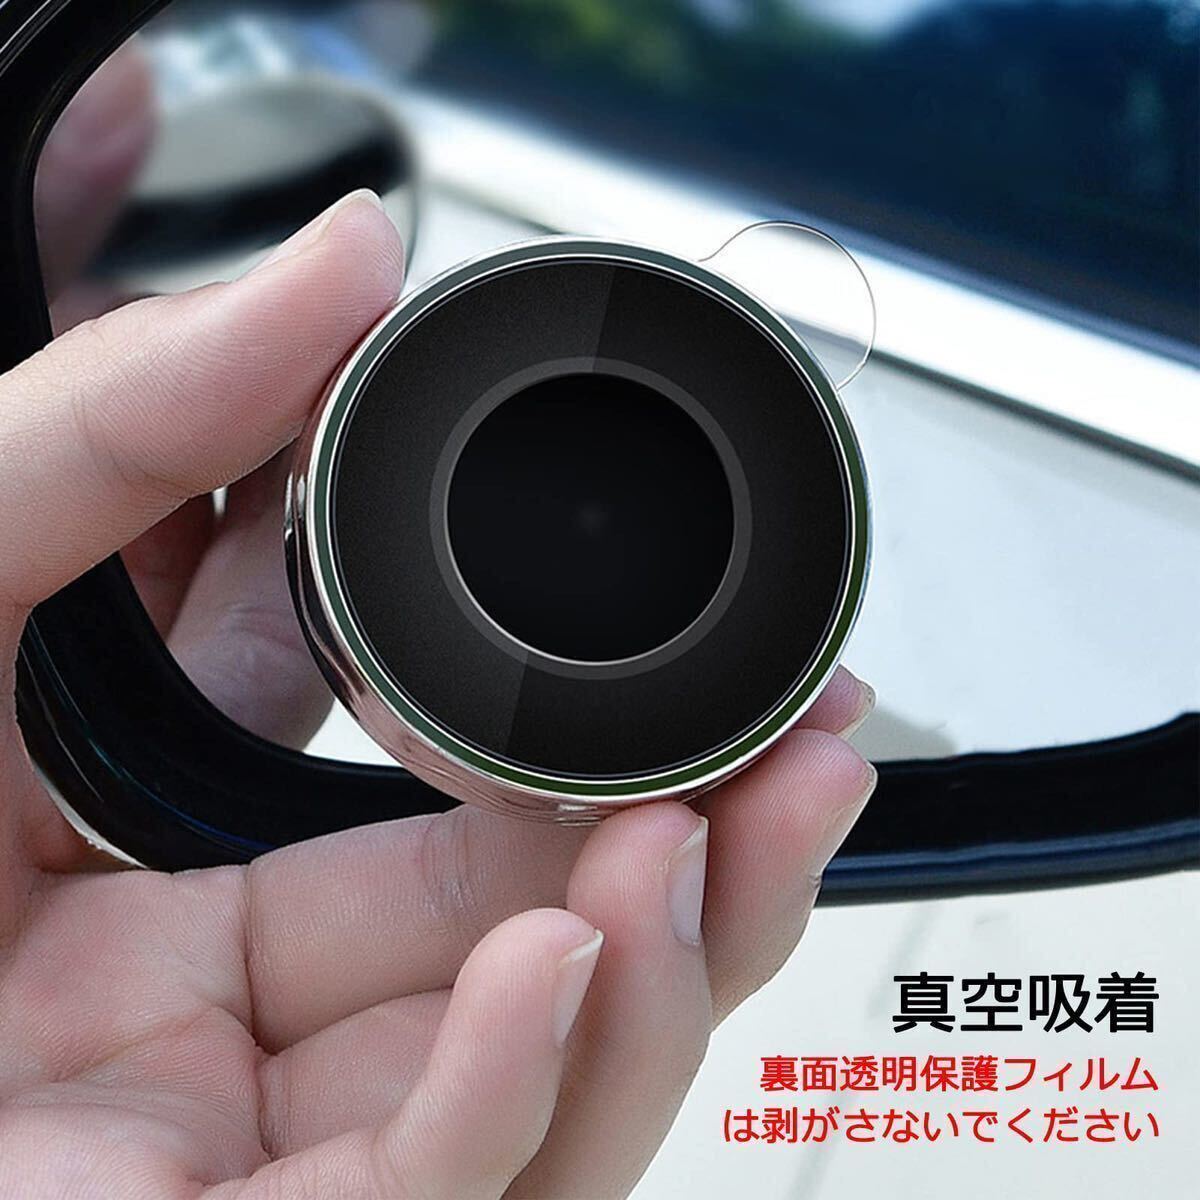  car assistance mirror .. suction pad type round shape side mirror rearview mirror automobile assistance spot mirror 2 point set new goods Yamato mail 